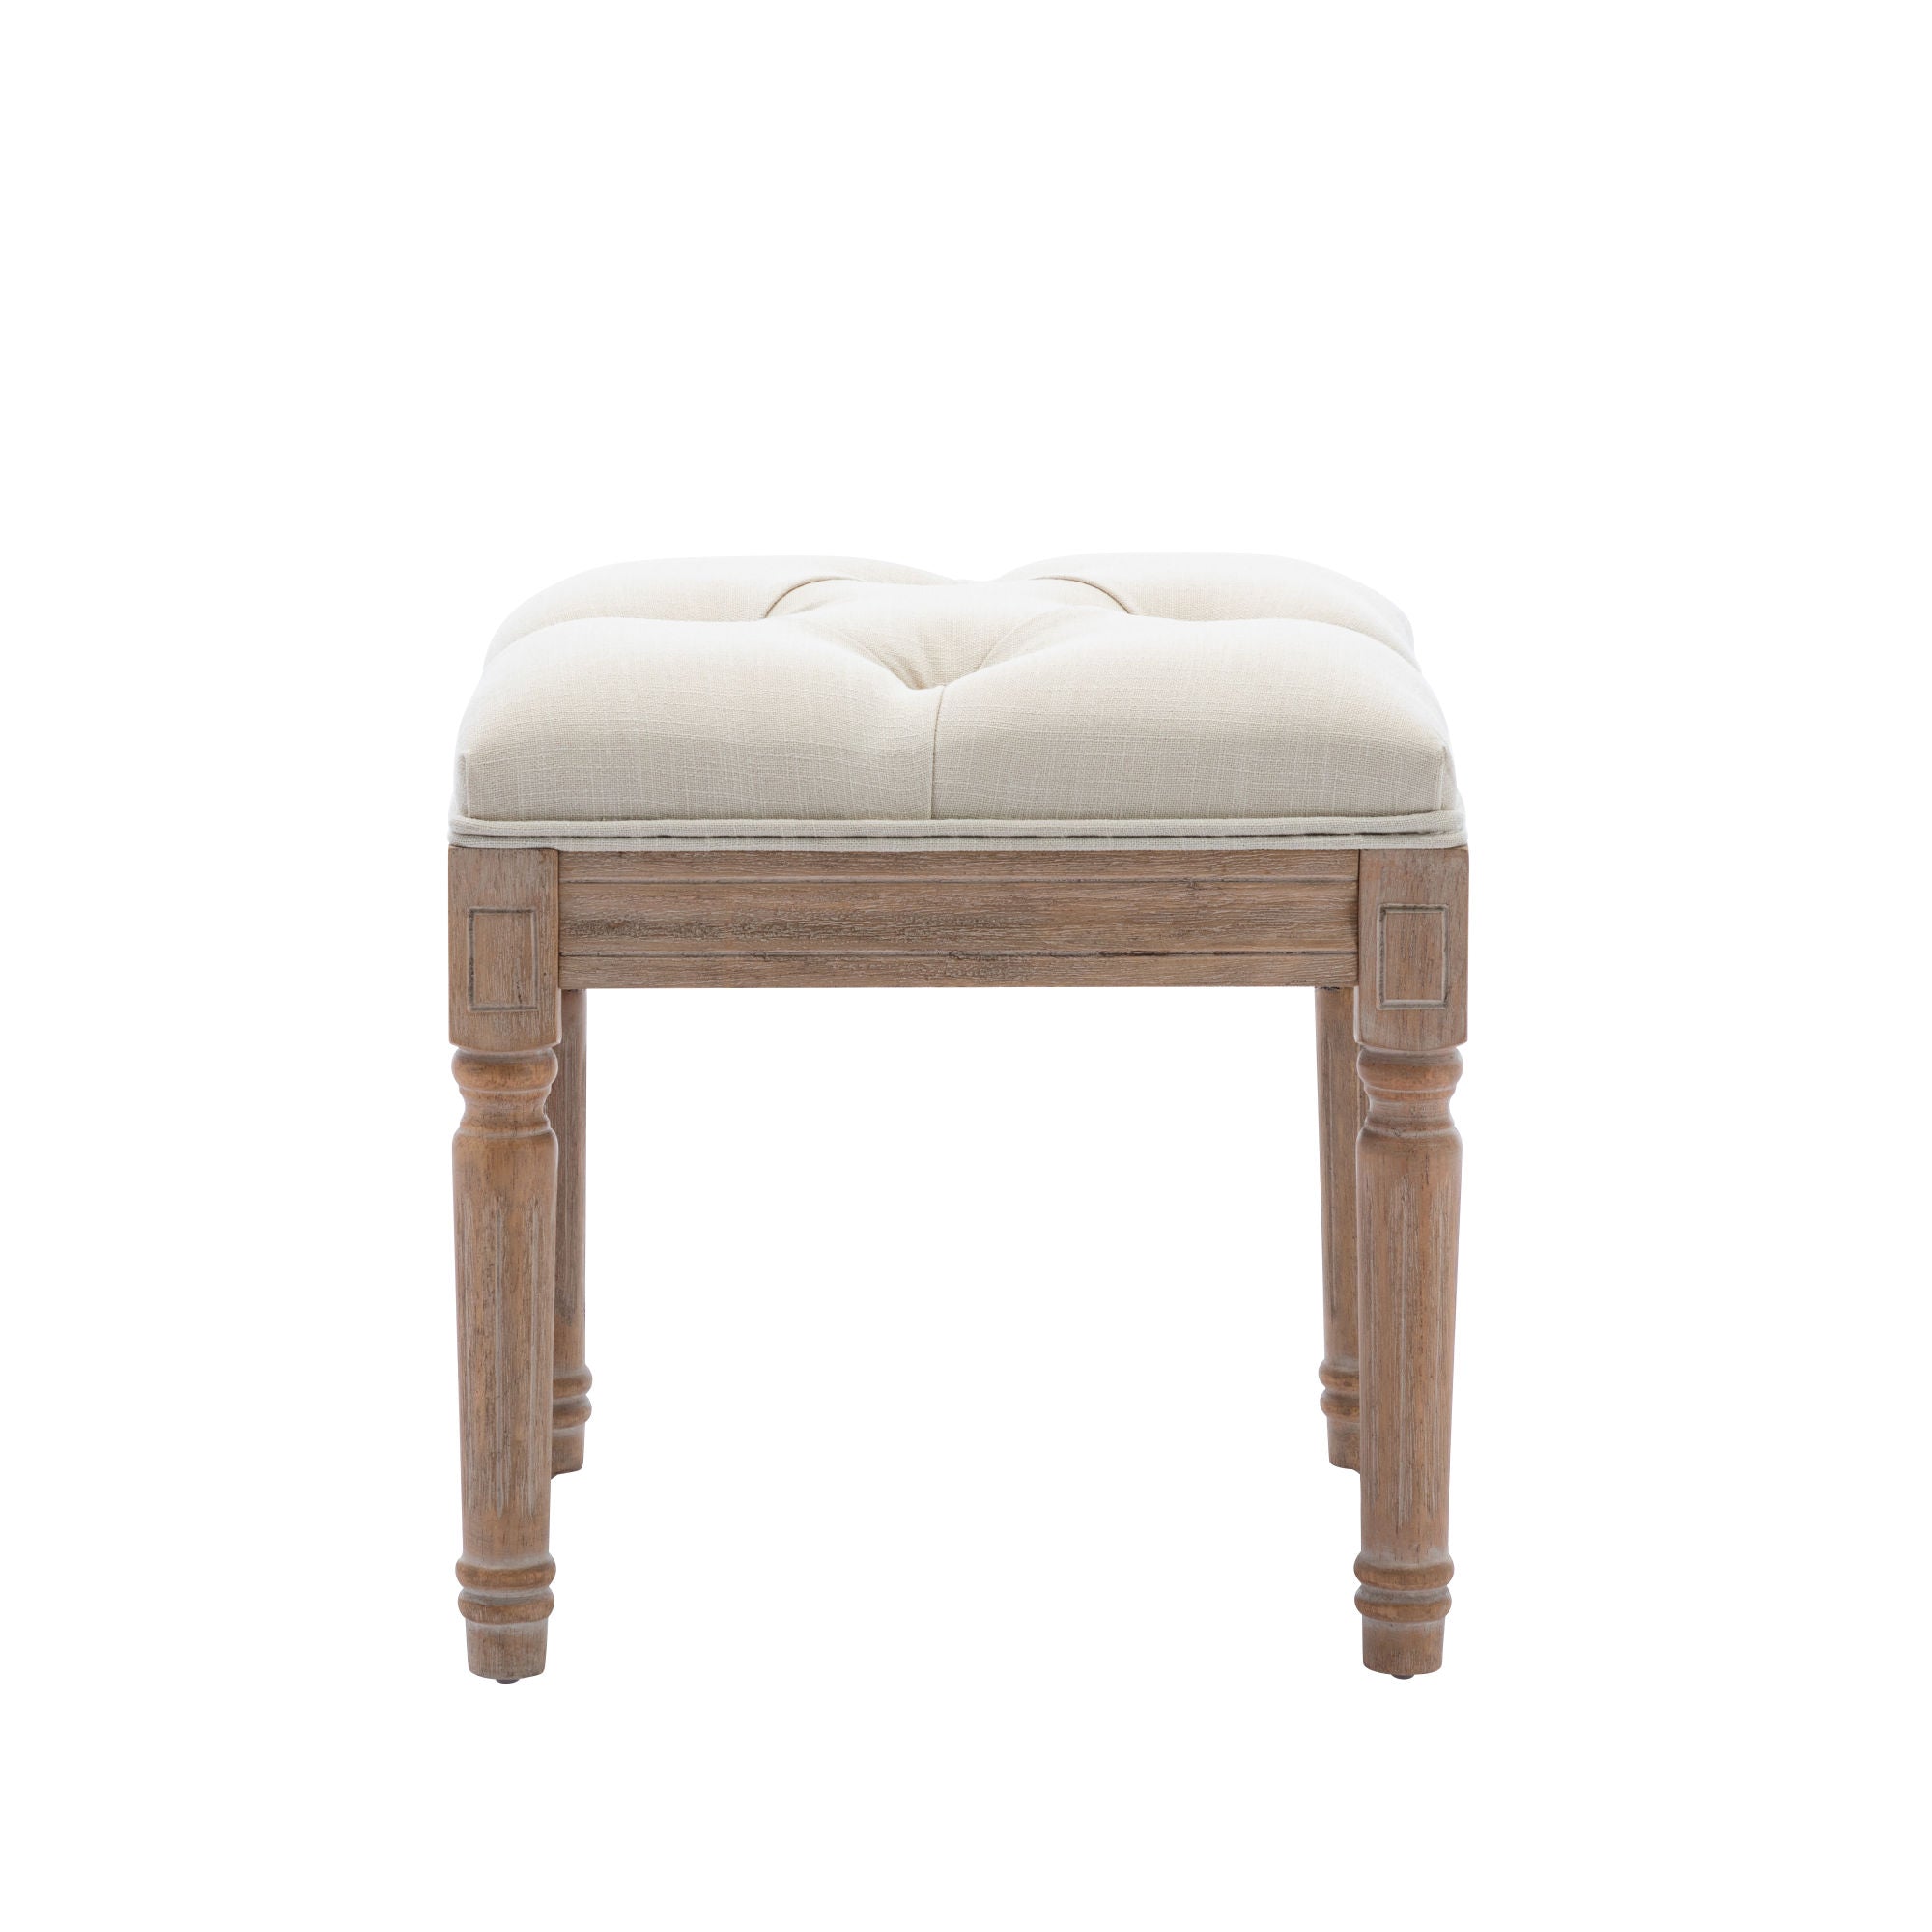 Padded Square Ottoman Bench